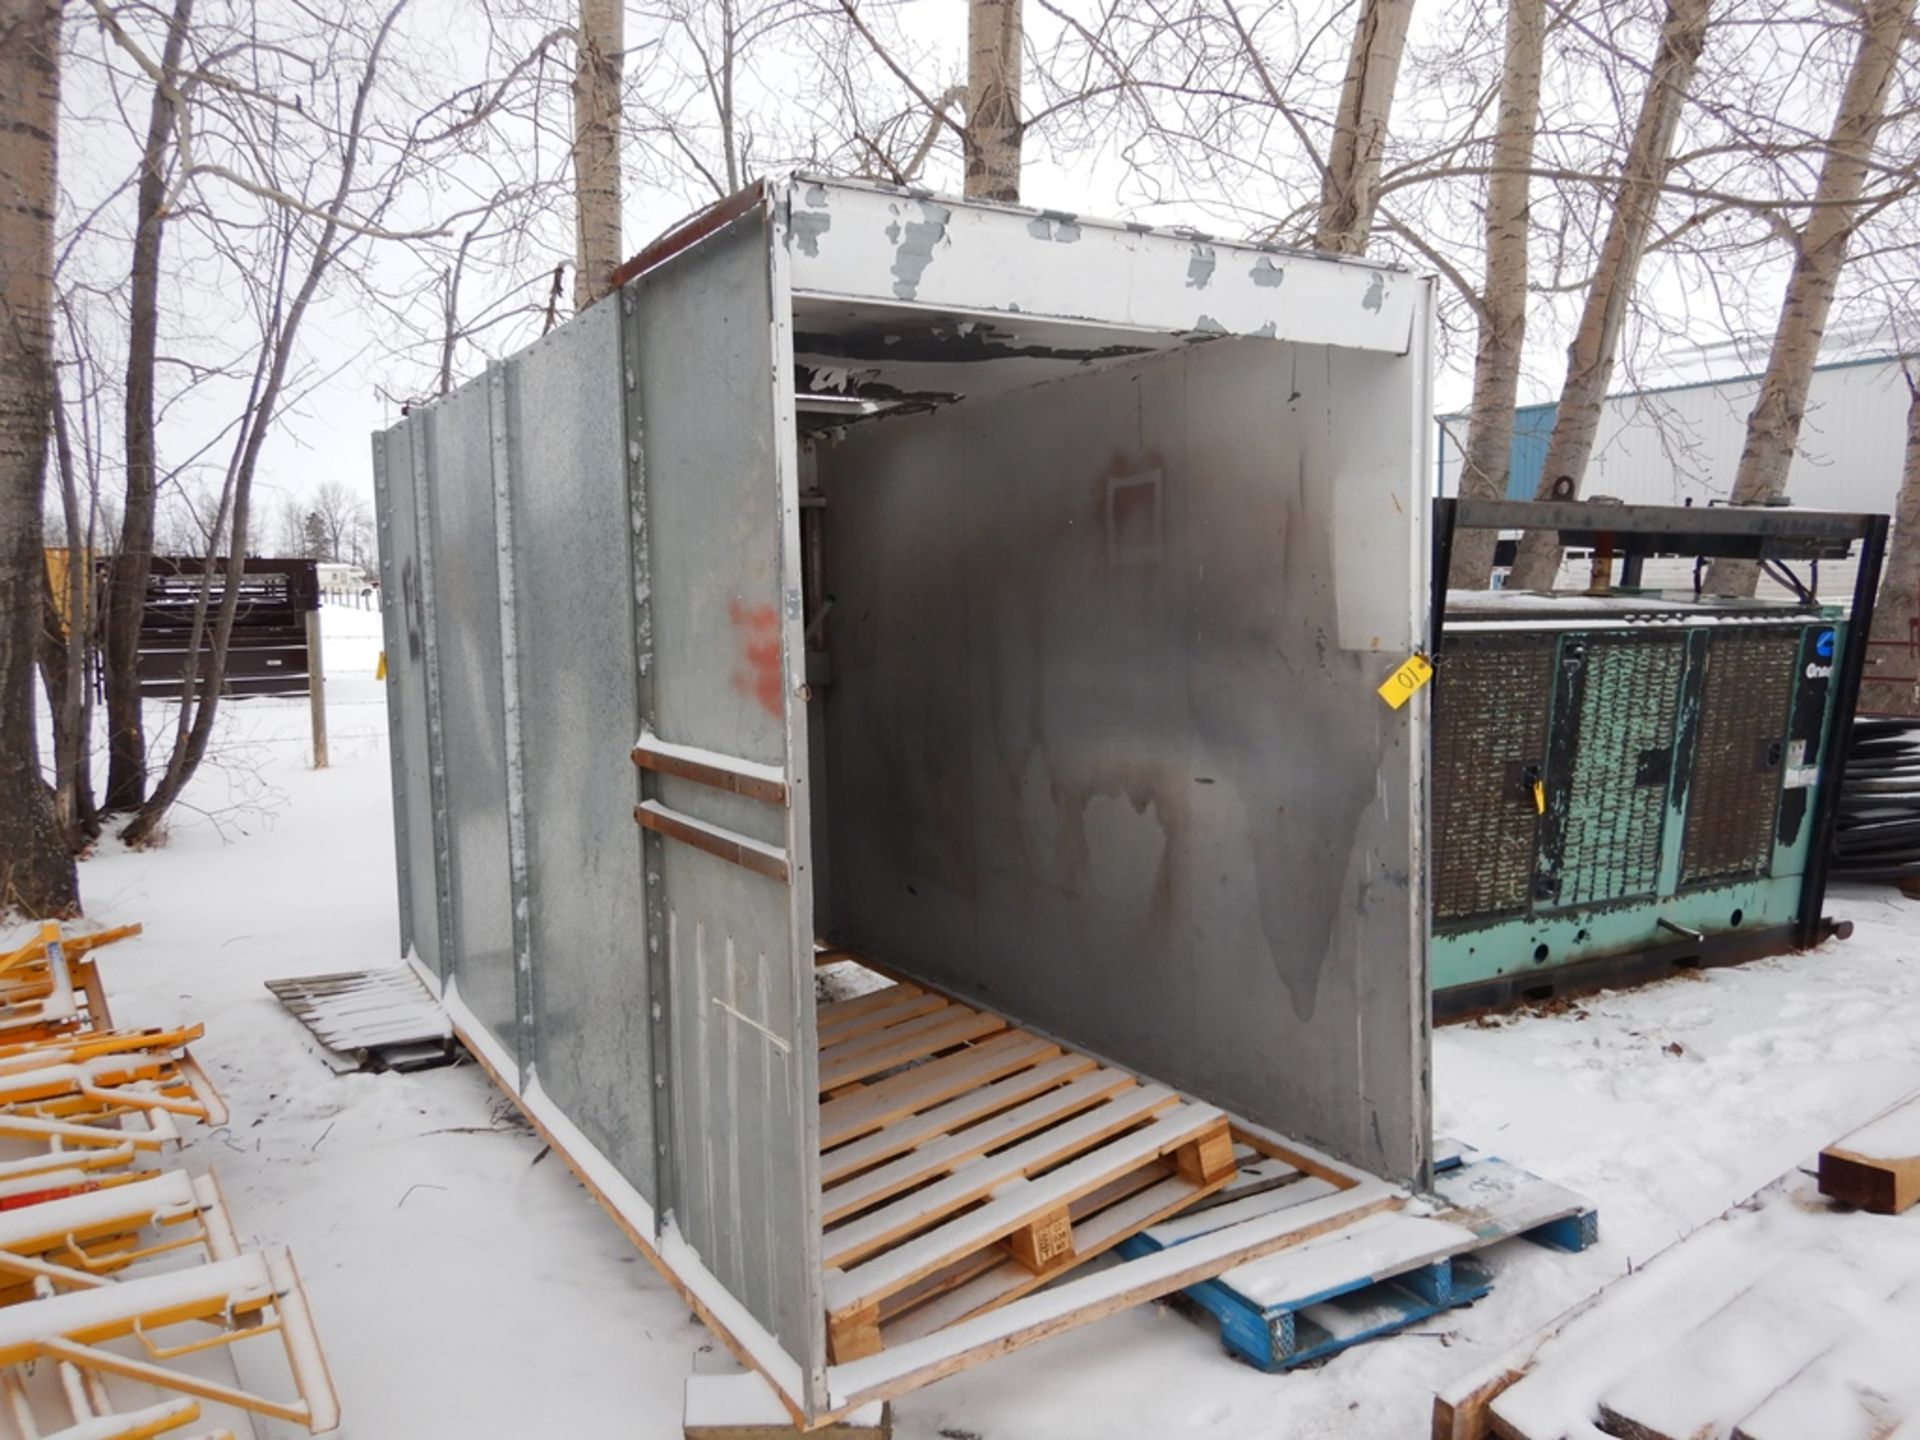 GALVANIZED INDUSTRIAL SPRAY BOOTH, 60"WX12.5'lX 82"H